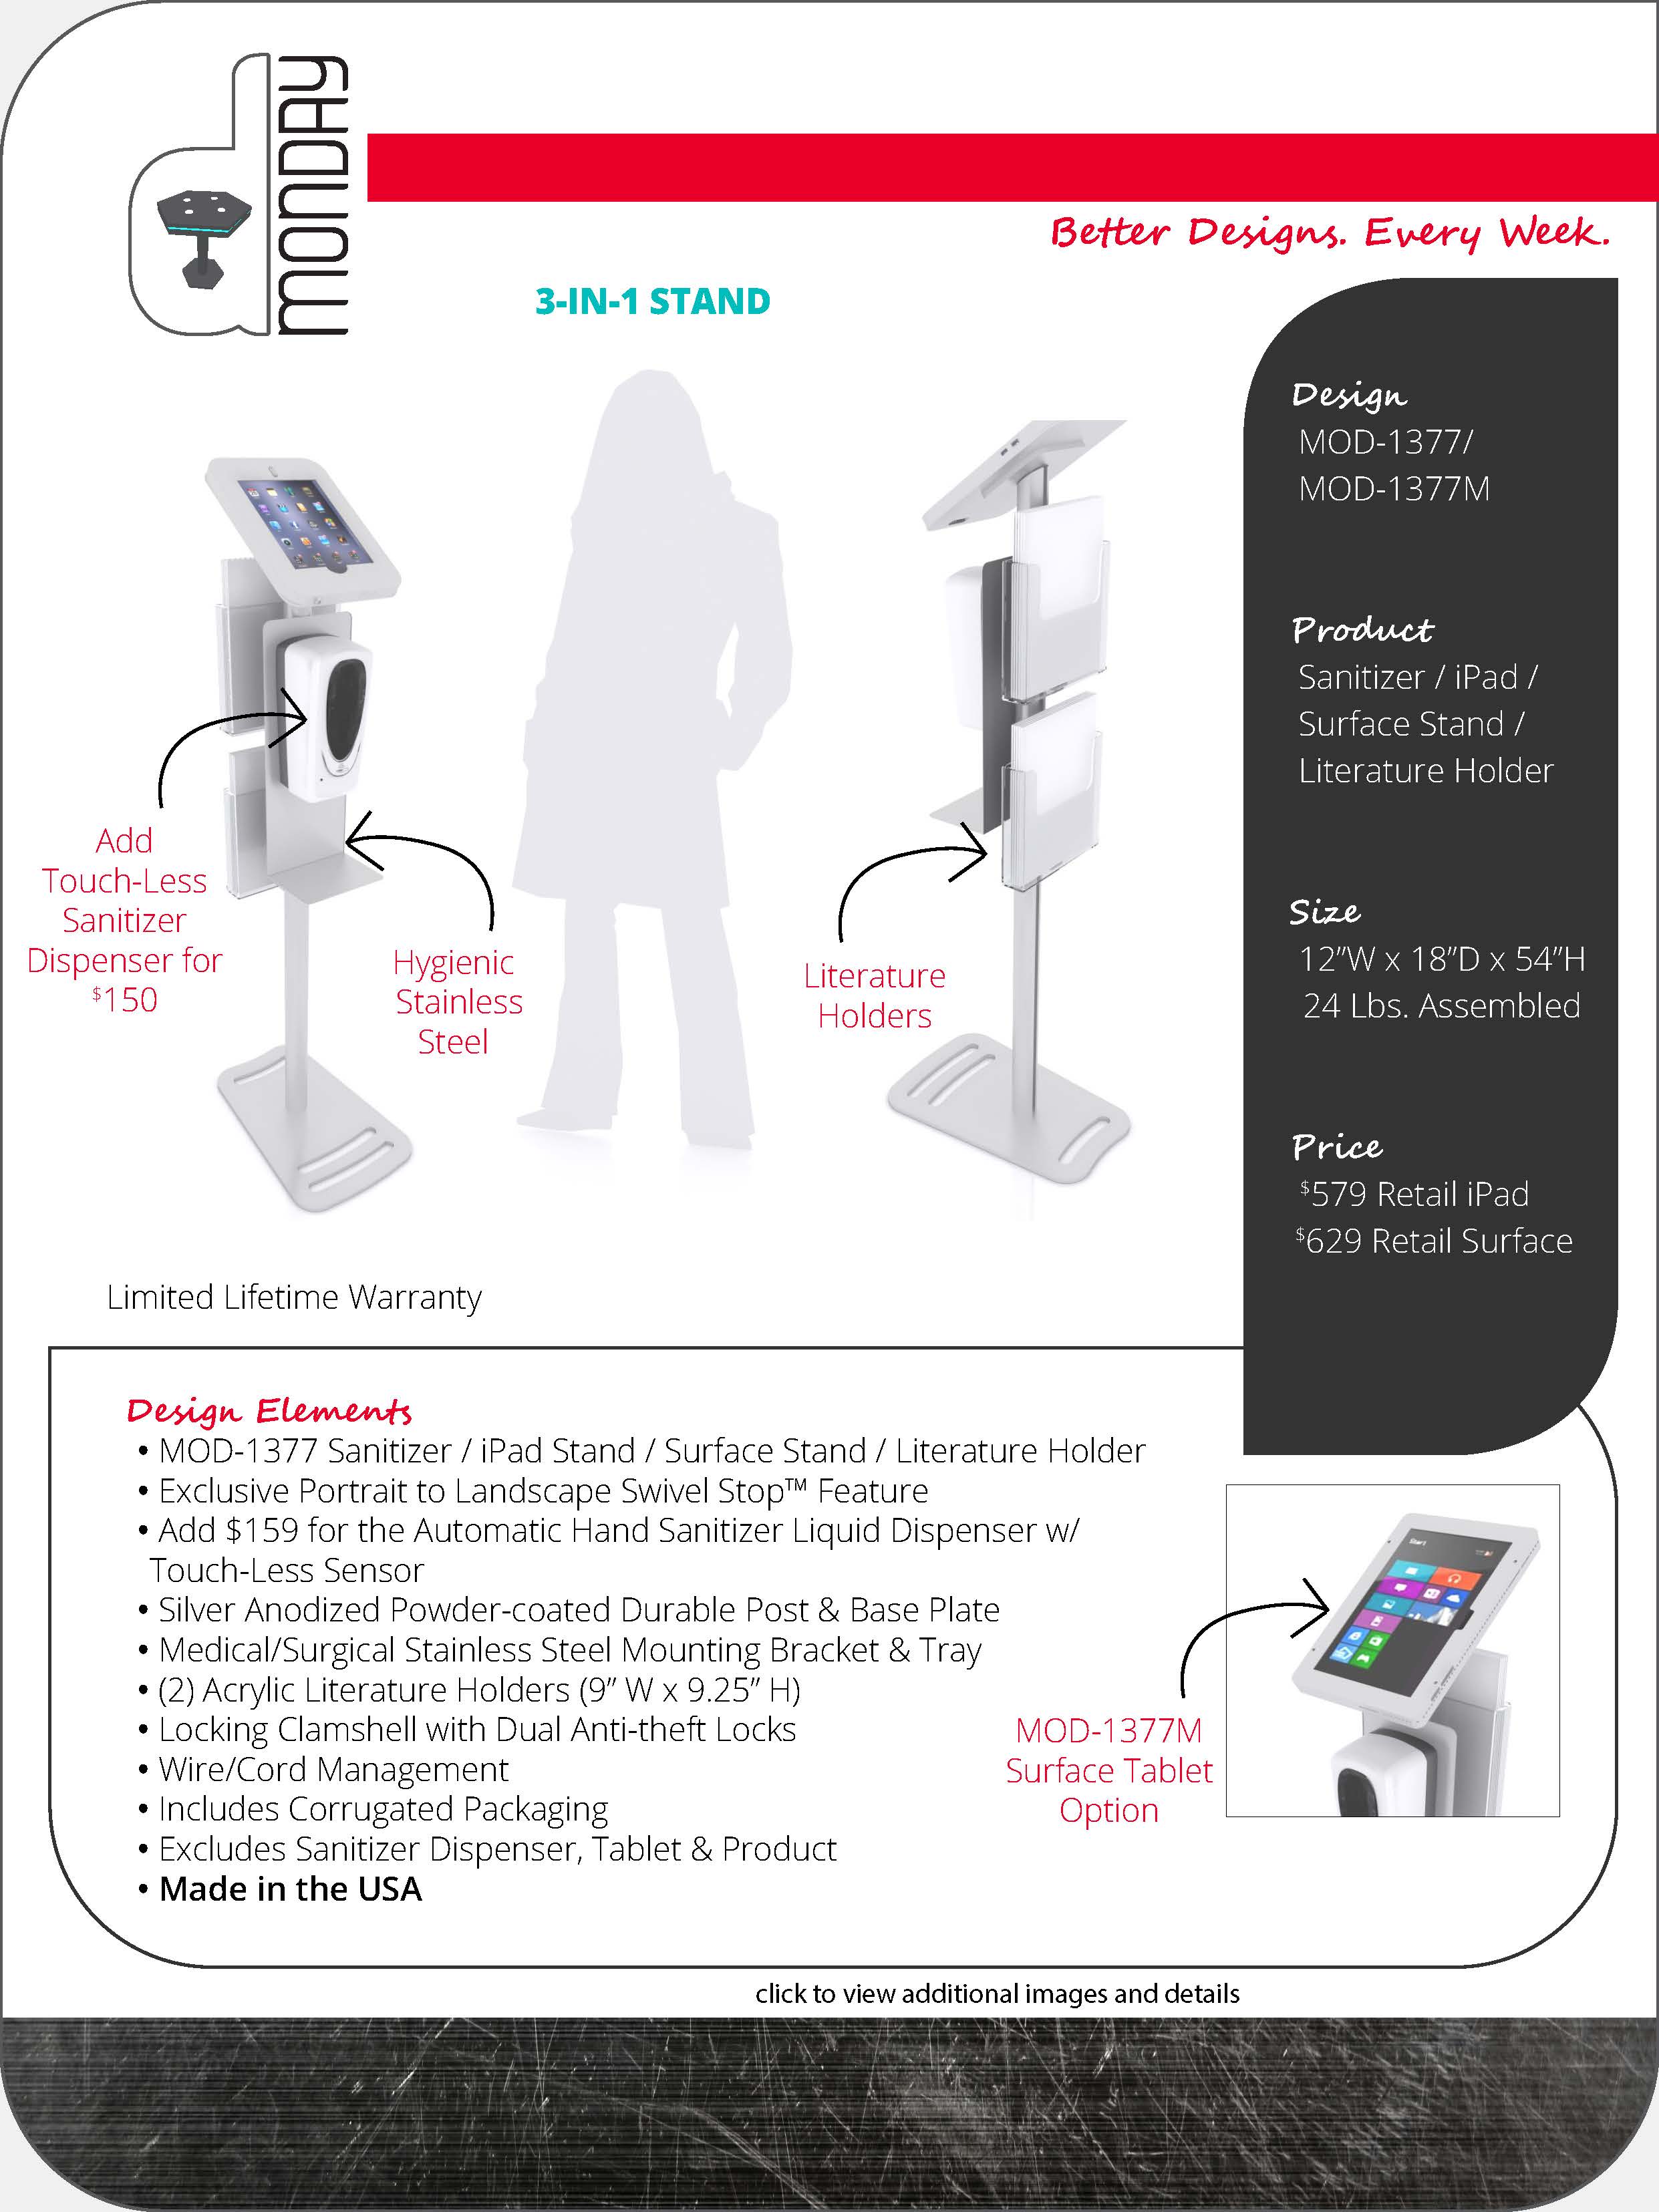 Multi-function Hand Sanitizer Stands with Tablet Option